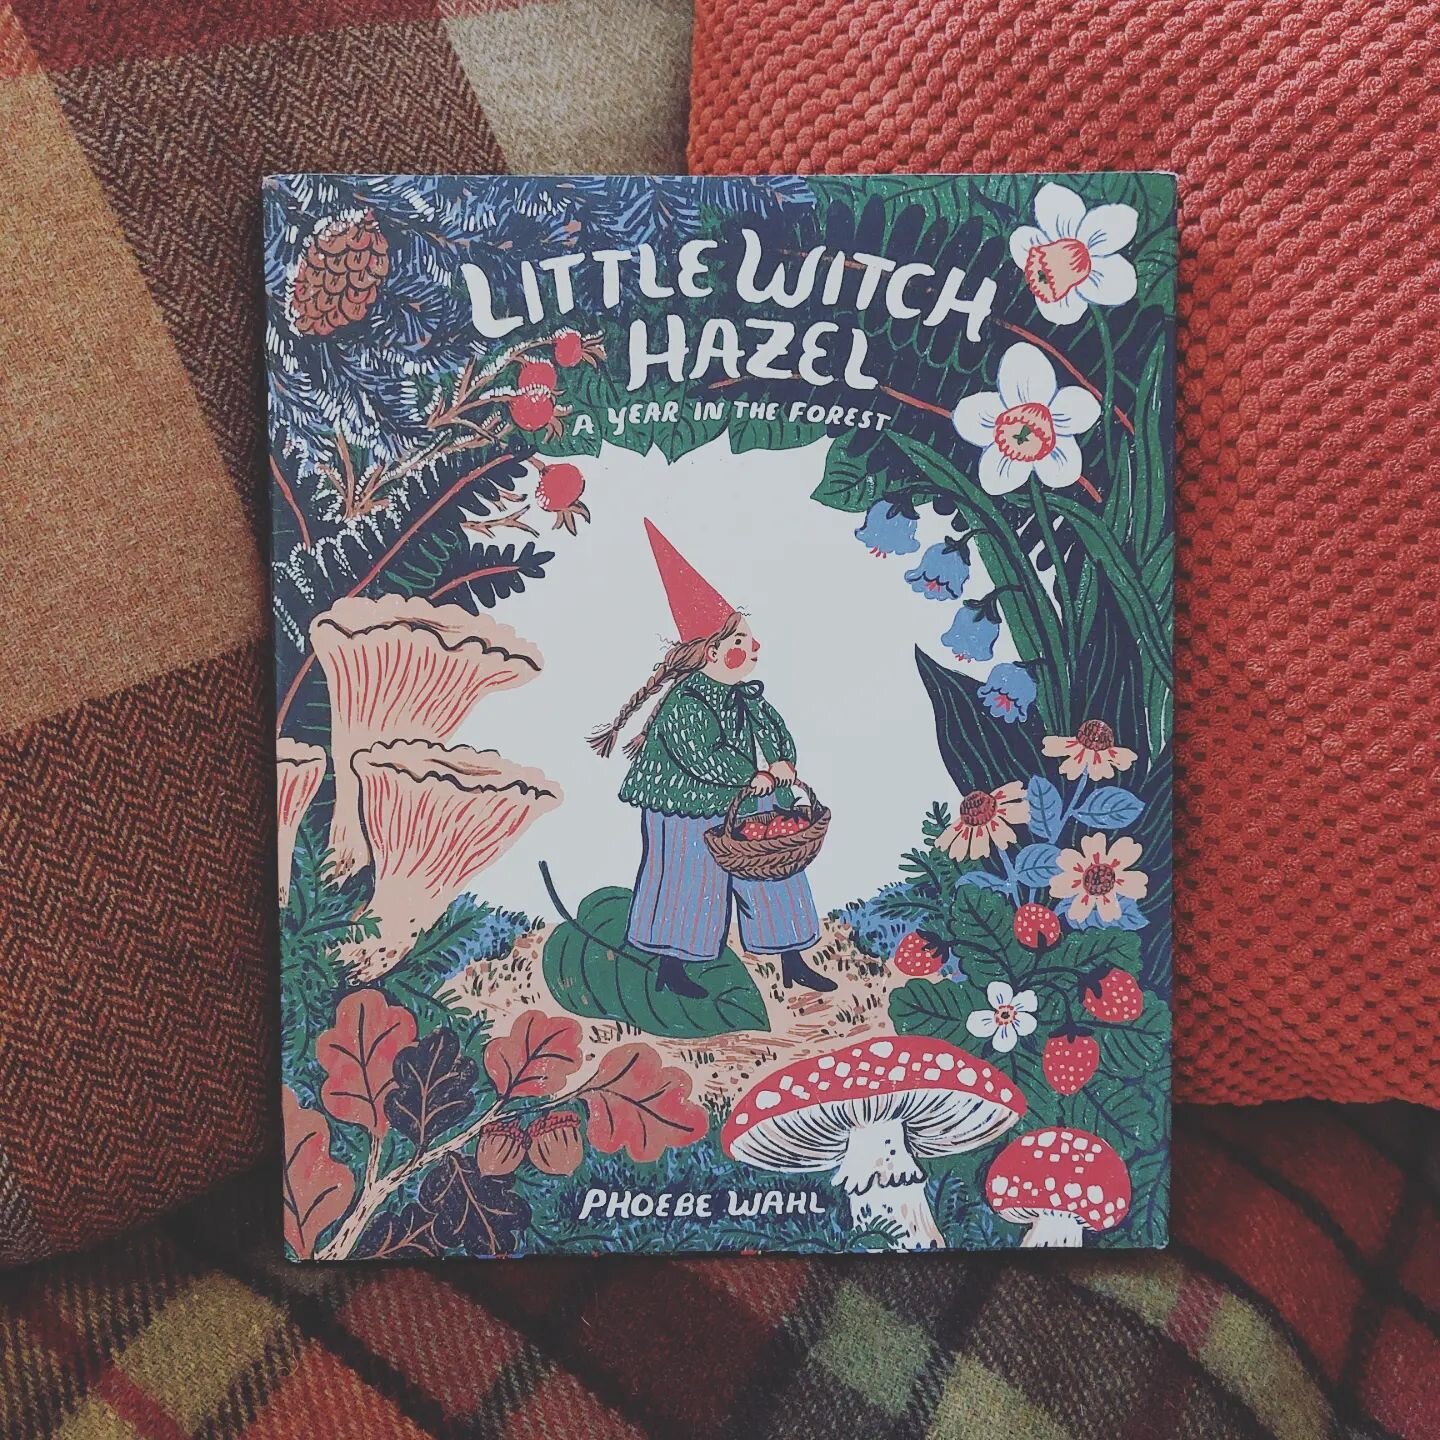 Another gorgeous witchy gift, this time from my parents. Adore the work of @phoebewahl and this book of hers is so wonderful. Reminds me of all my favourites, like Brambly Hedge &amp; Frog and Toad. Lovely lovely lovely 🐸🍄📚

#LittleWitchHazel #pic